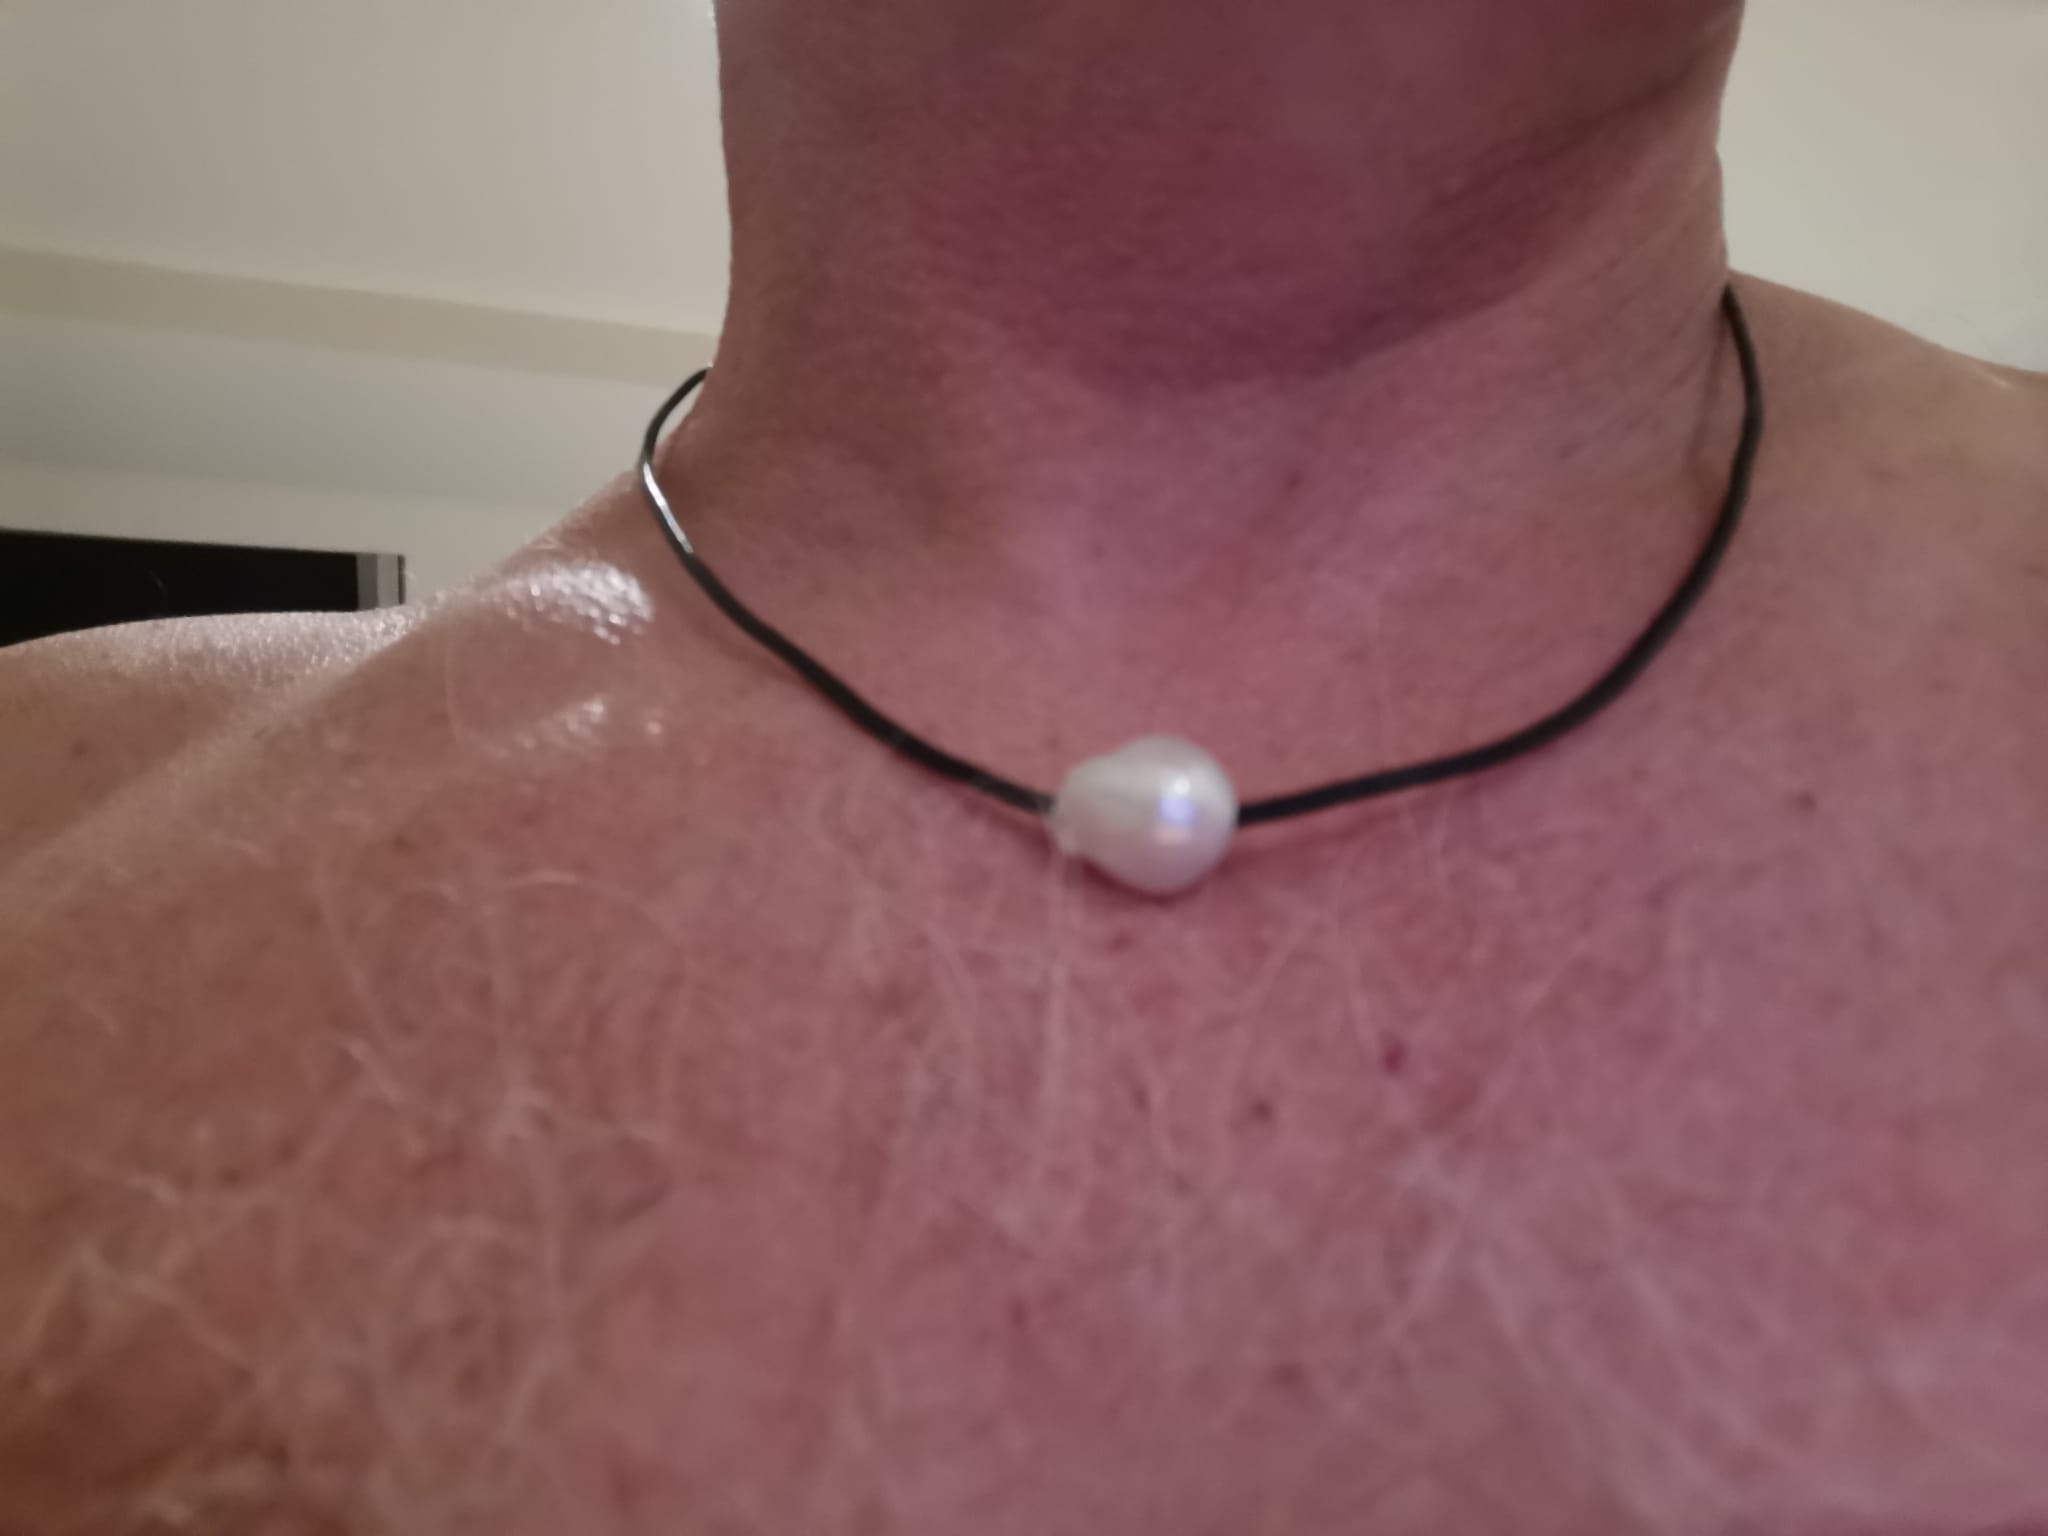 bright white pearl on a black leather thong bought again from Pearlescence